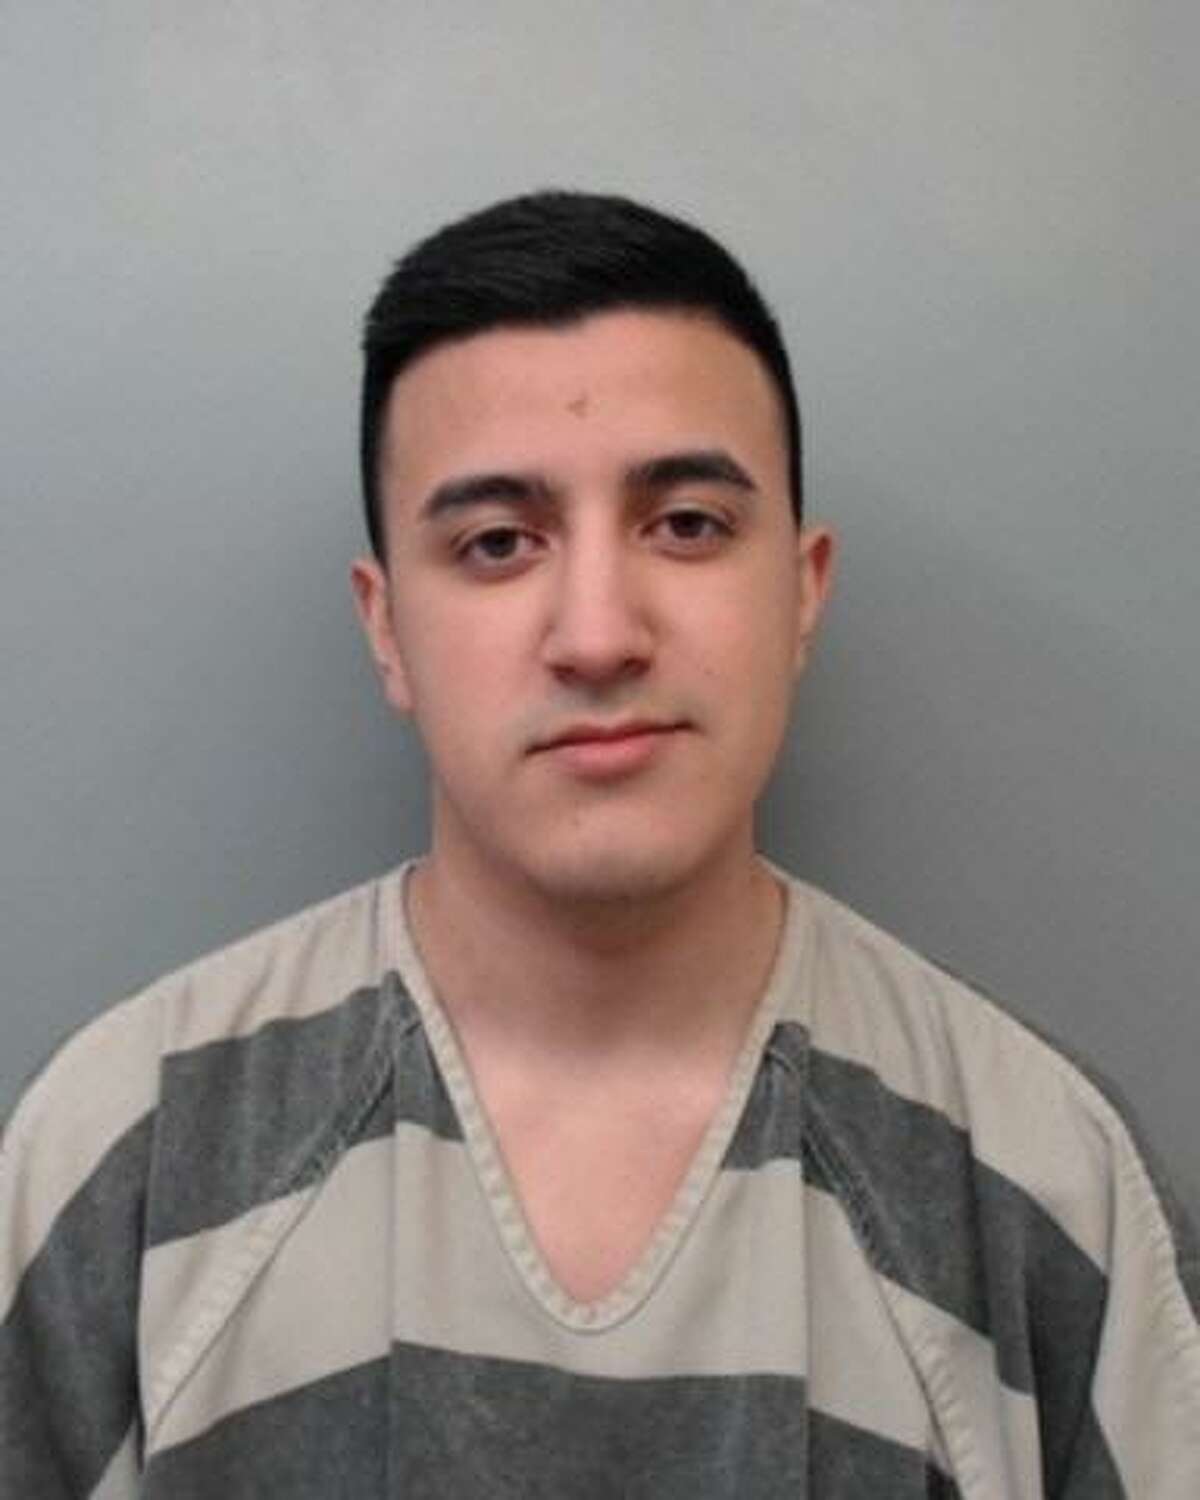 Juan Manuel Avalos, 21, was charged with aggravated sexual assault.